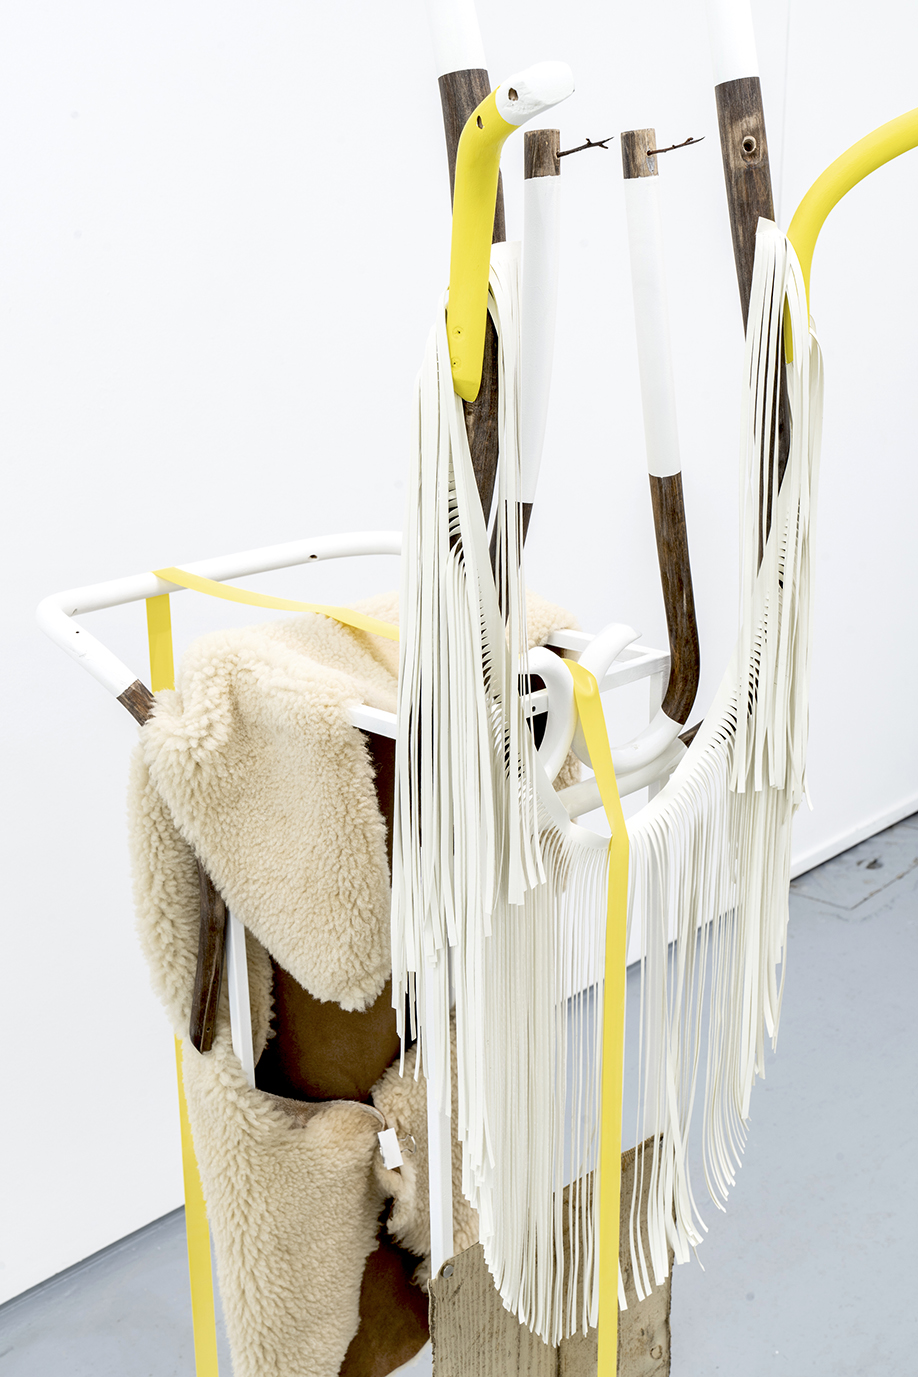 <b>Title: </b>PRECARIOUS CONDITIONS OF UNCERTAINTY V<br /><b>Year: </b>2021<br /><b>Medium: </b>De-constructed chair, Steel, accreted latex, PVC, sheep skin, rubber, clips, paint, thorns<br /><b>Size: </b>188 x 40 x 70 cm